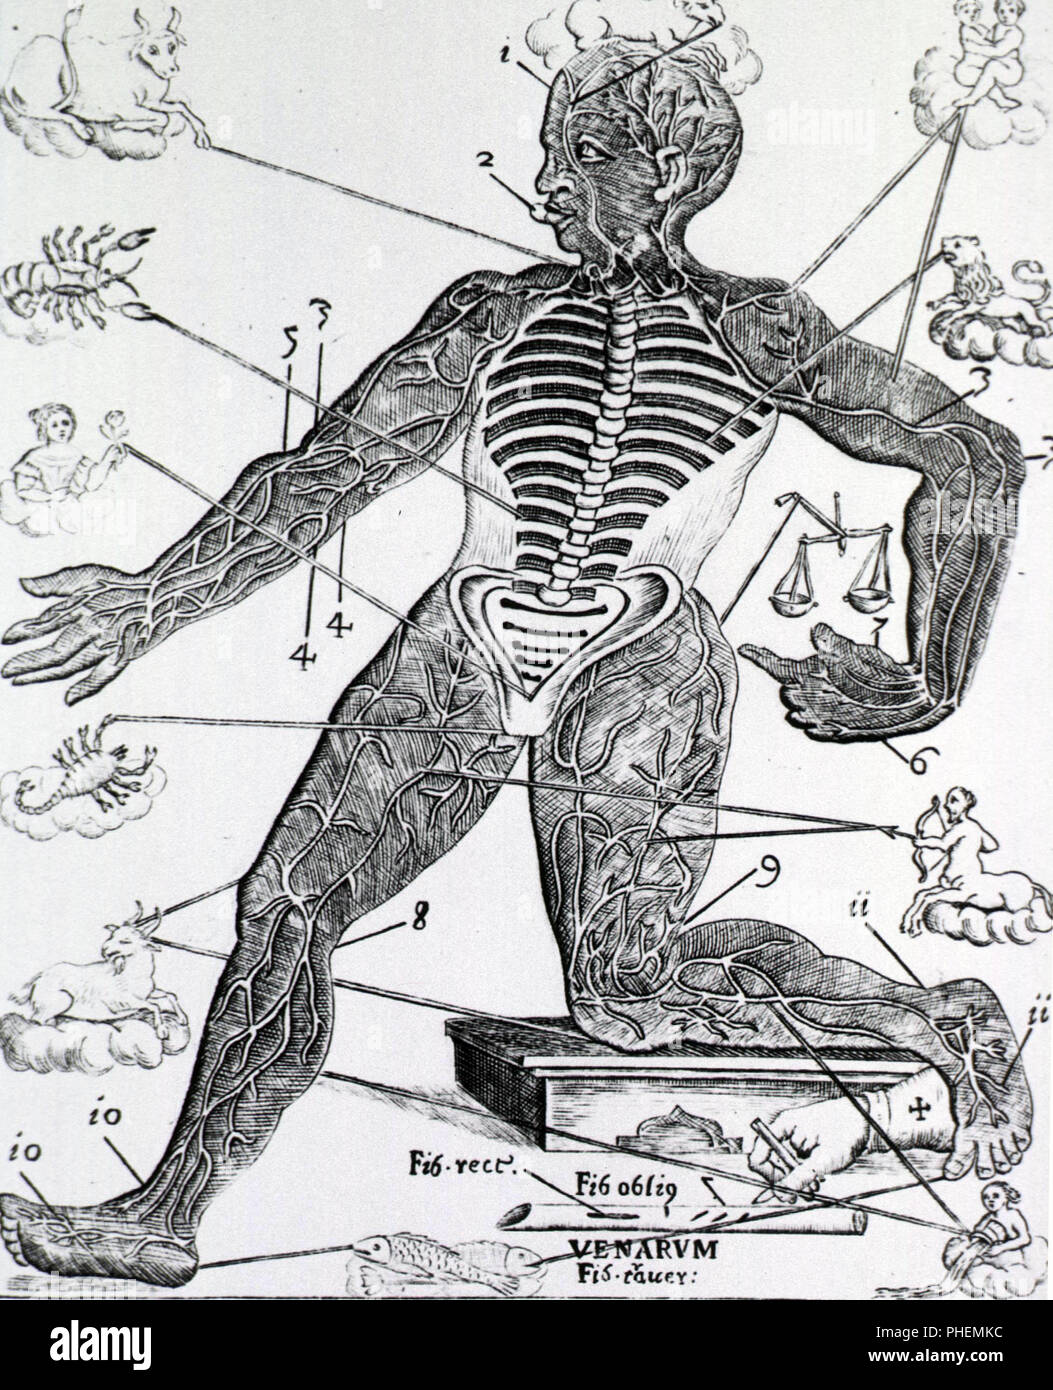 Human figure with the spine and ribs exposed, and showing veins and arteries in the extremities of the body; astrological signs are linked to the body parts they were thought to influence. Stock Photo